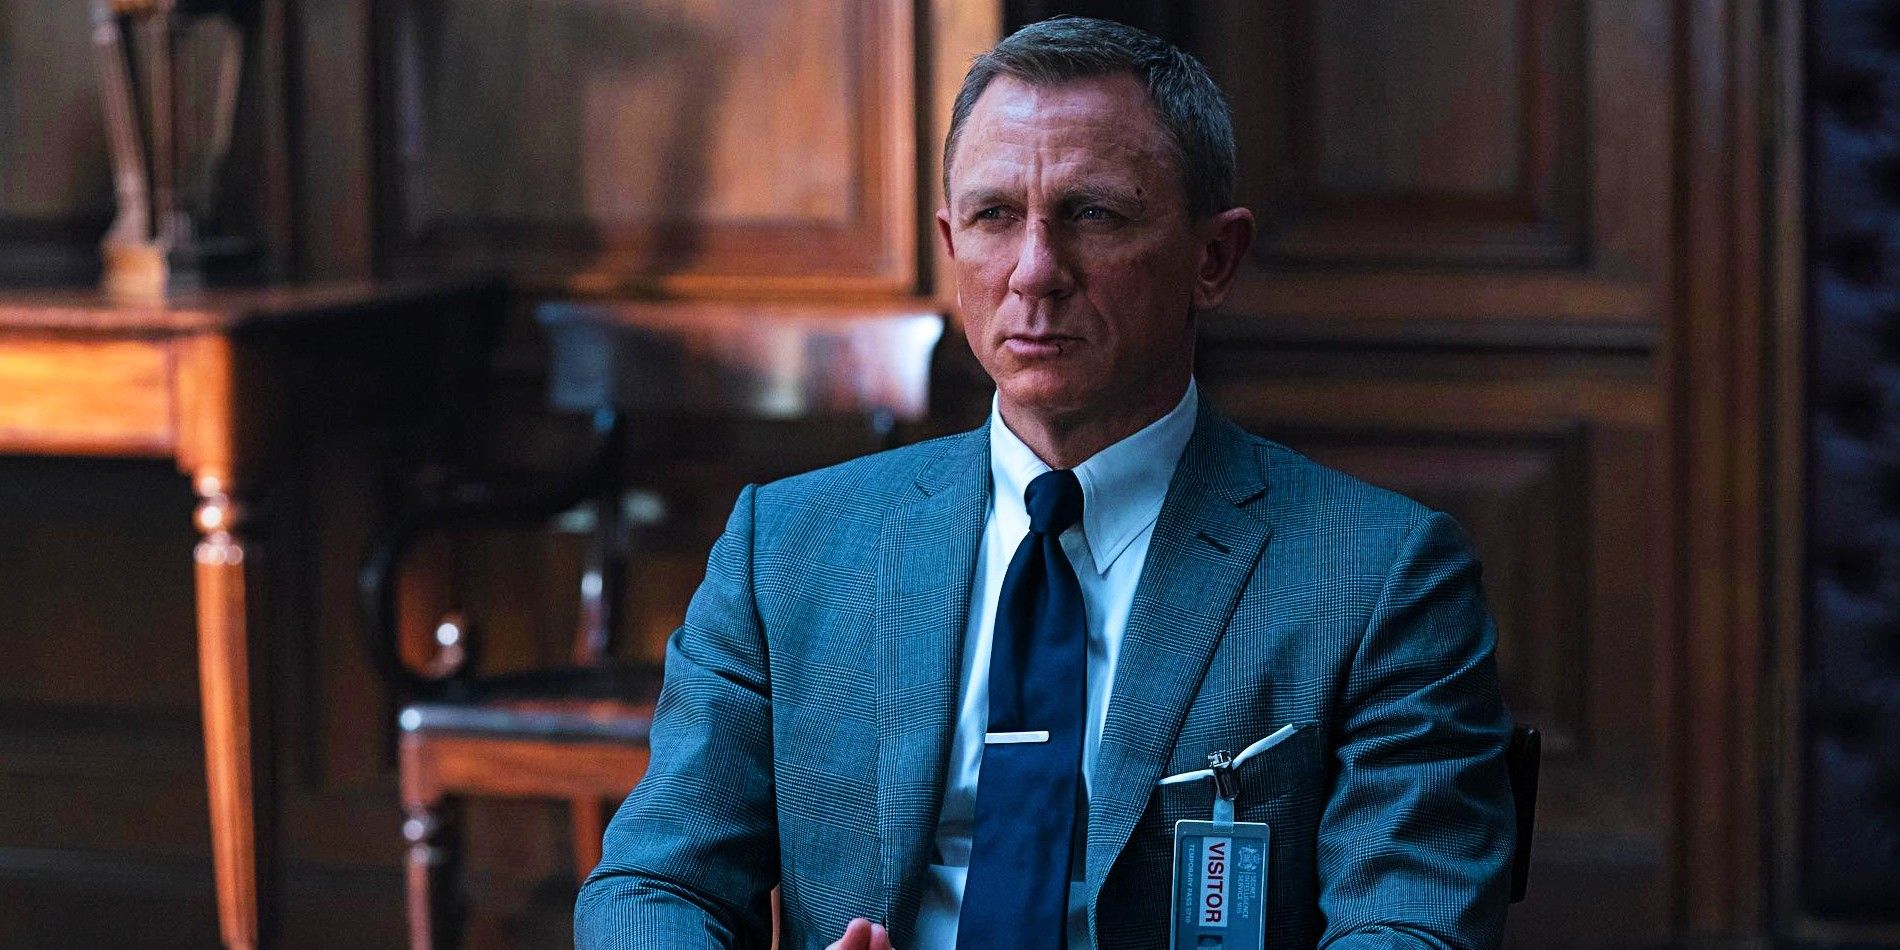 James Bond sits in M's office in No Time to Die